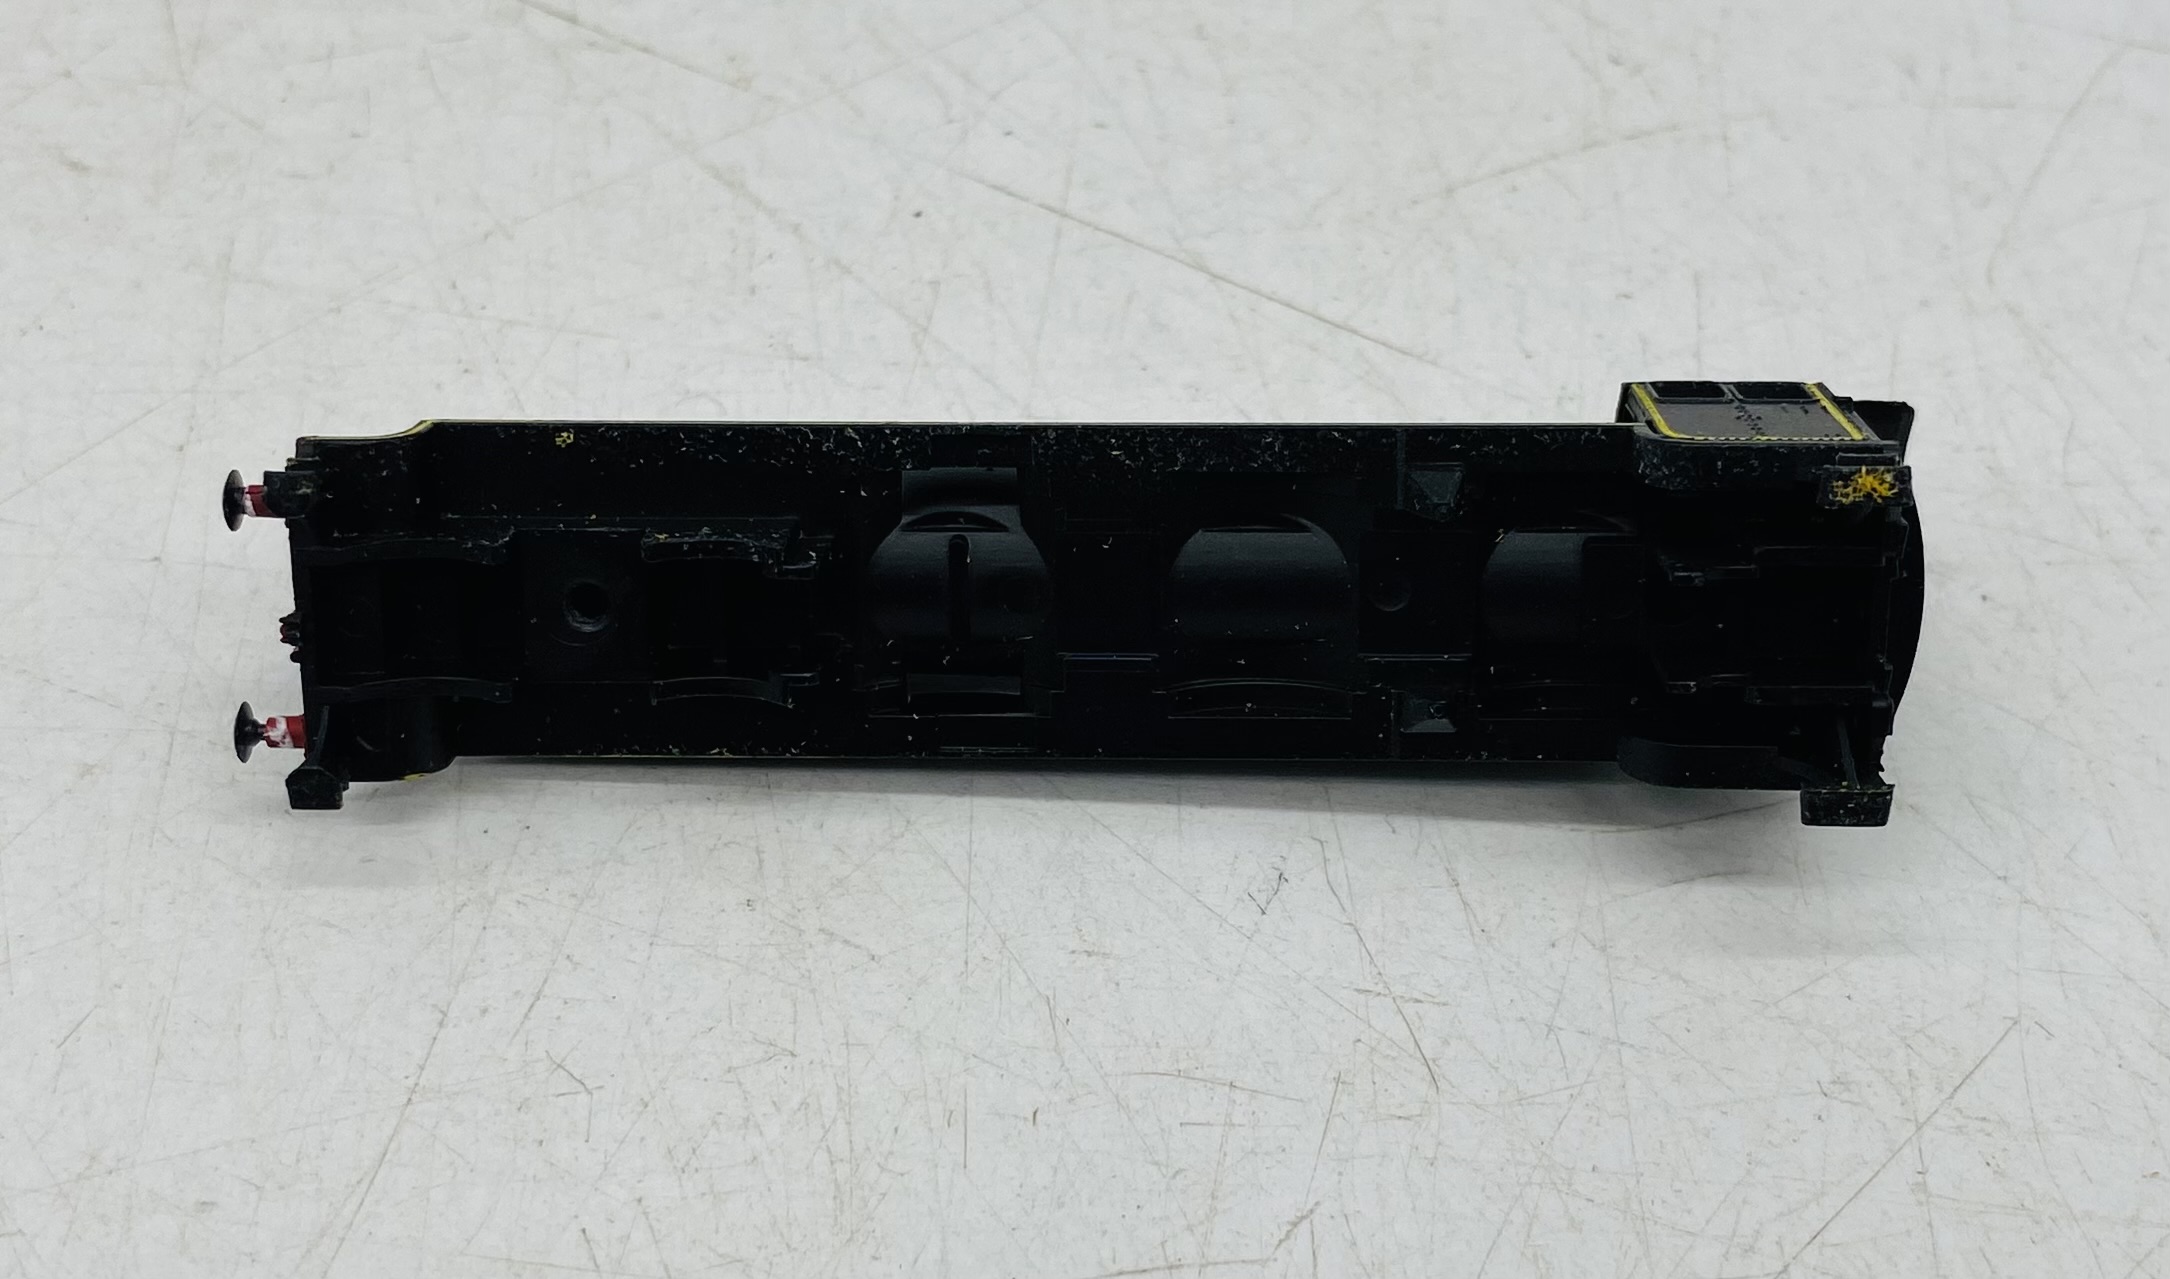 A collection of N gauge locomotive shells in black livery - shells only, no axels - Image 3 of 4